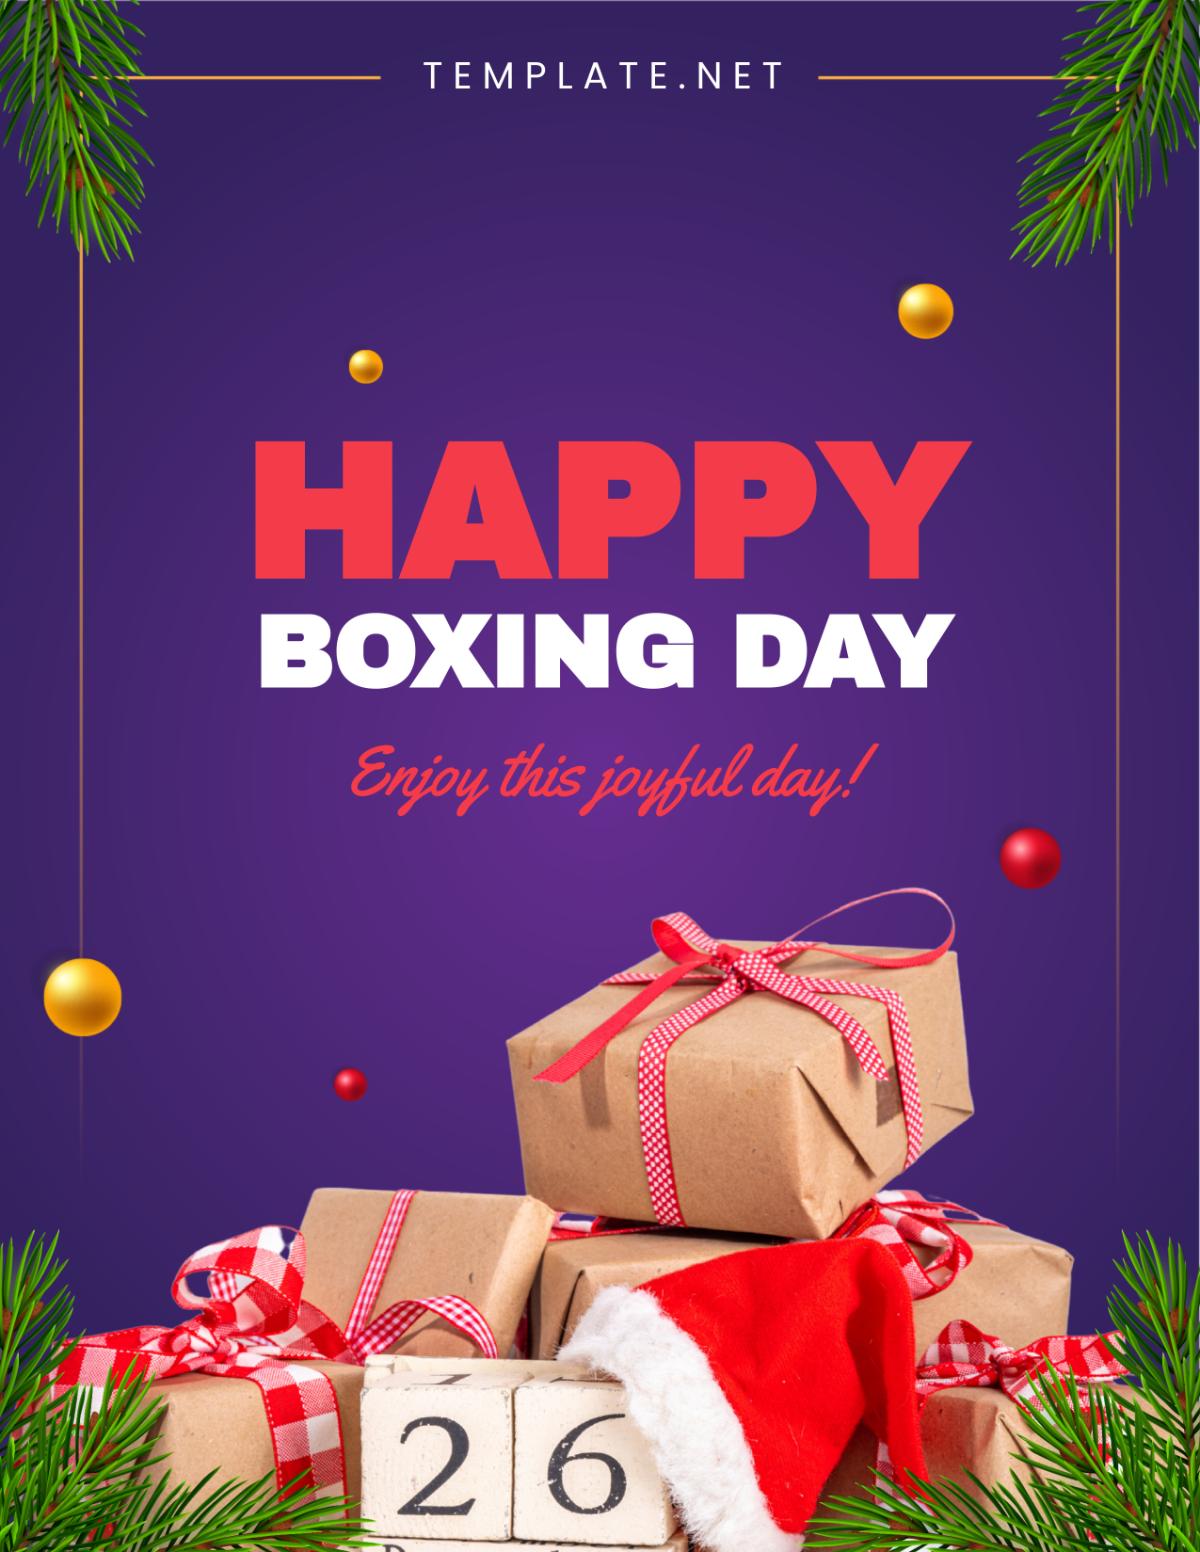 Free Boxing Day Flyer Design Template